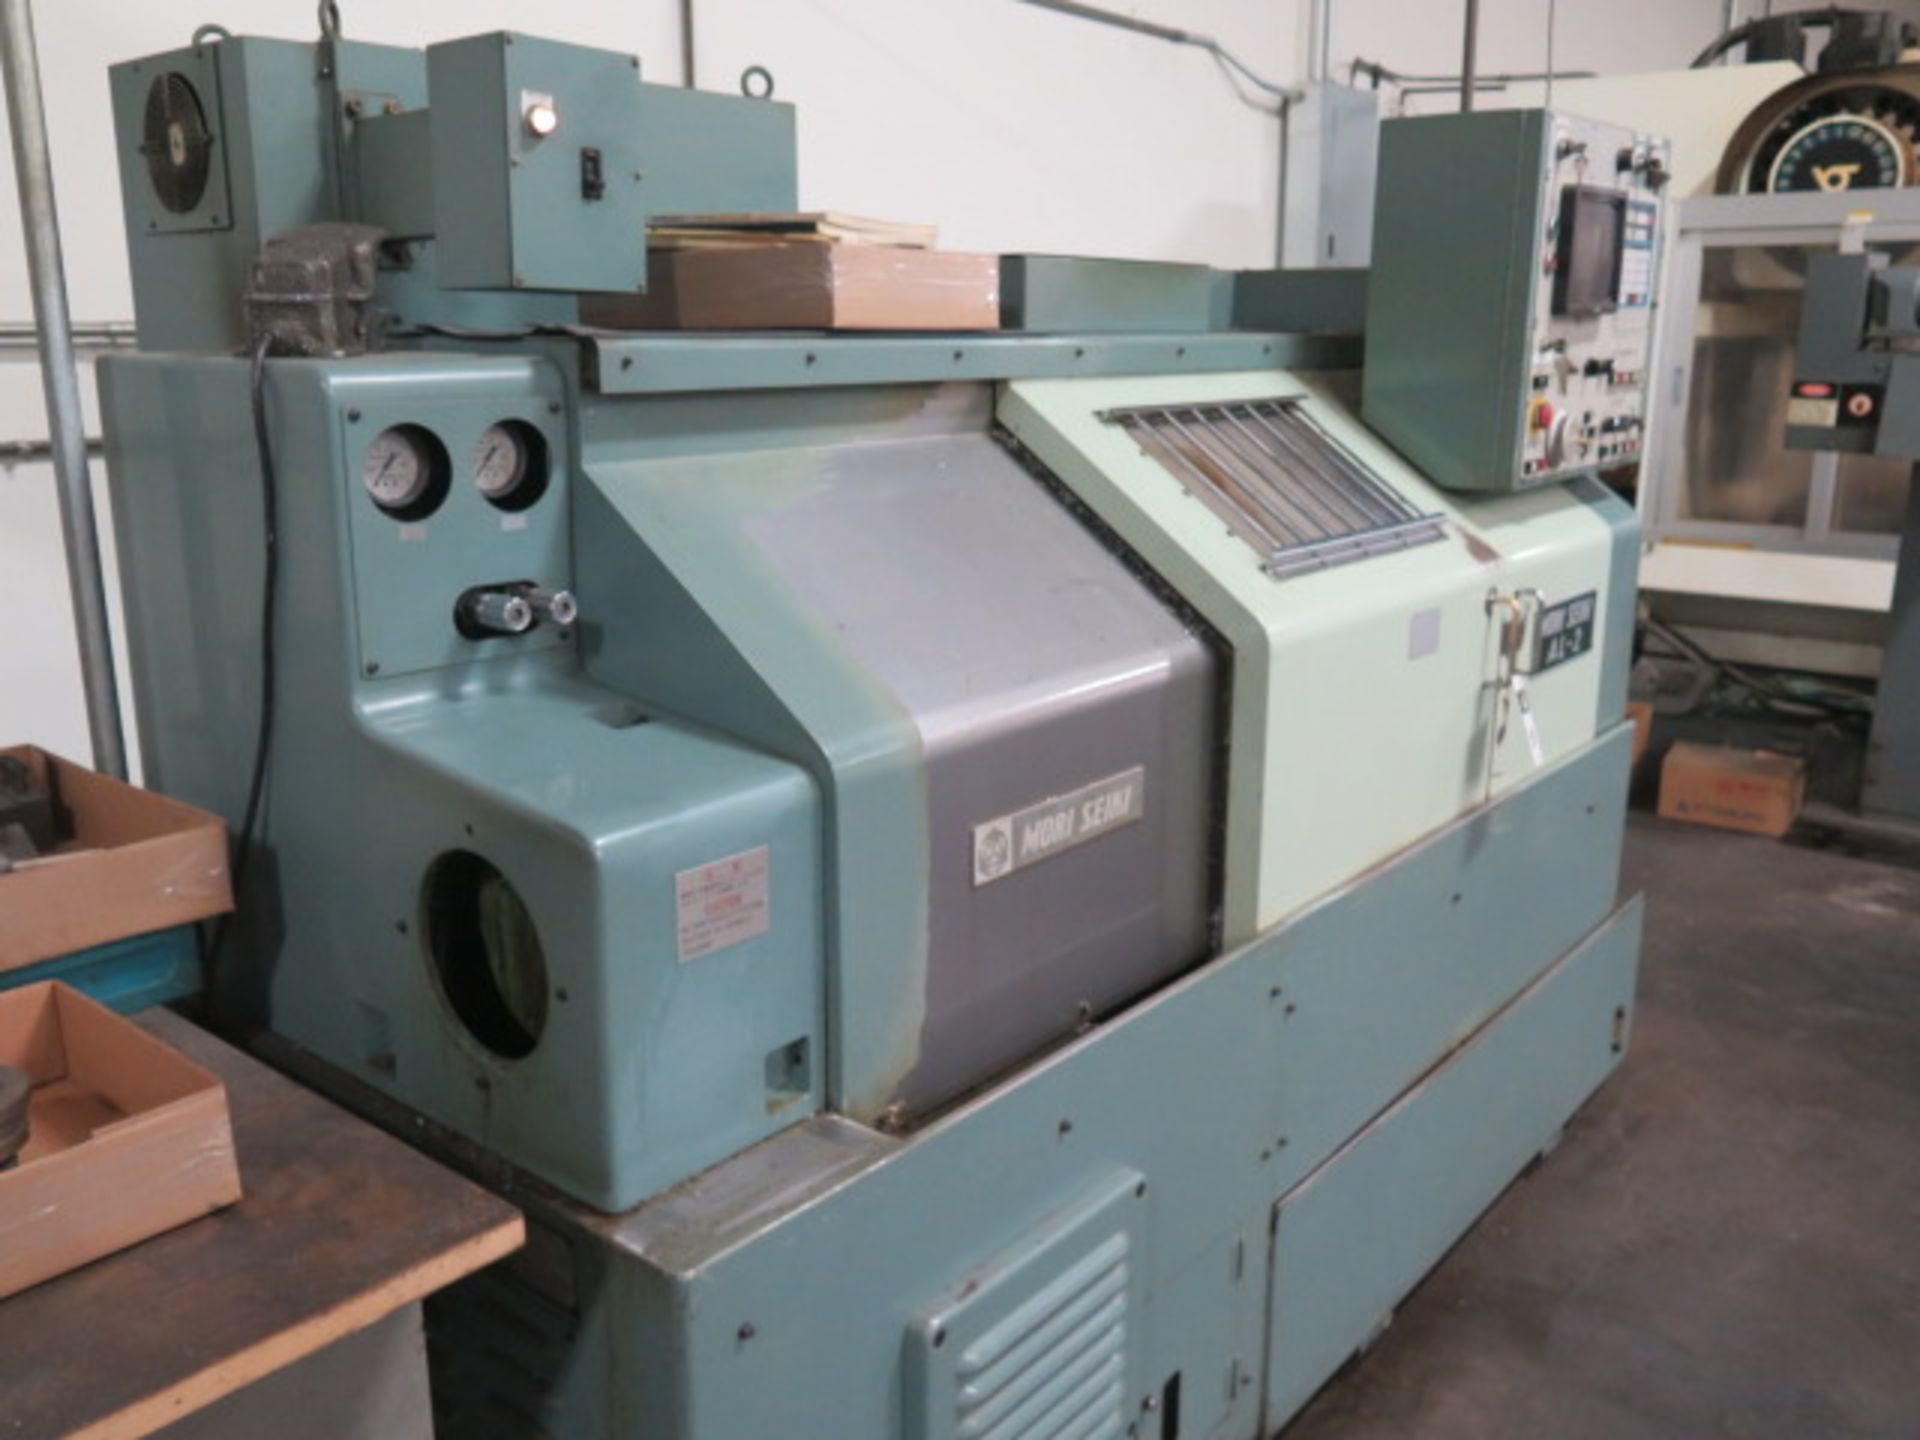 Mori Seiki AL-2ATM CNC Lathe s/n 58 w/ Yasnac Controls, Tool Presetter, 8-Station Turret, SOLD AS IS - Image 3 of 17